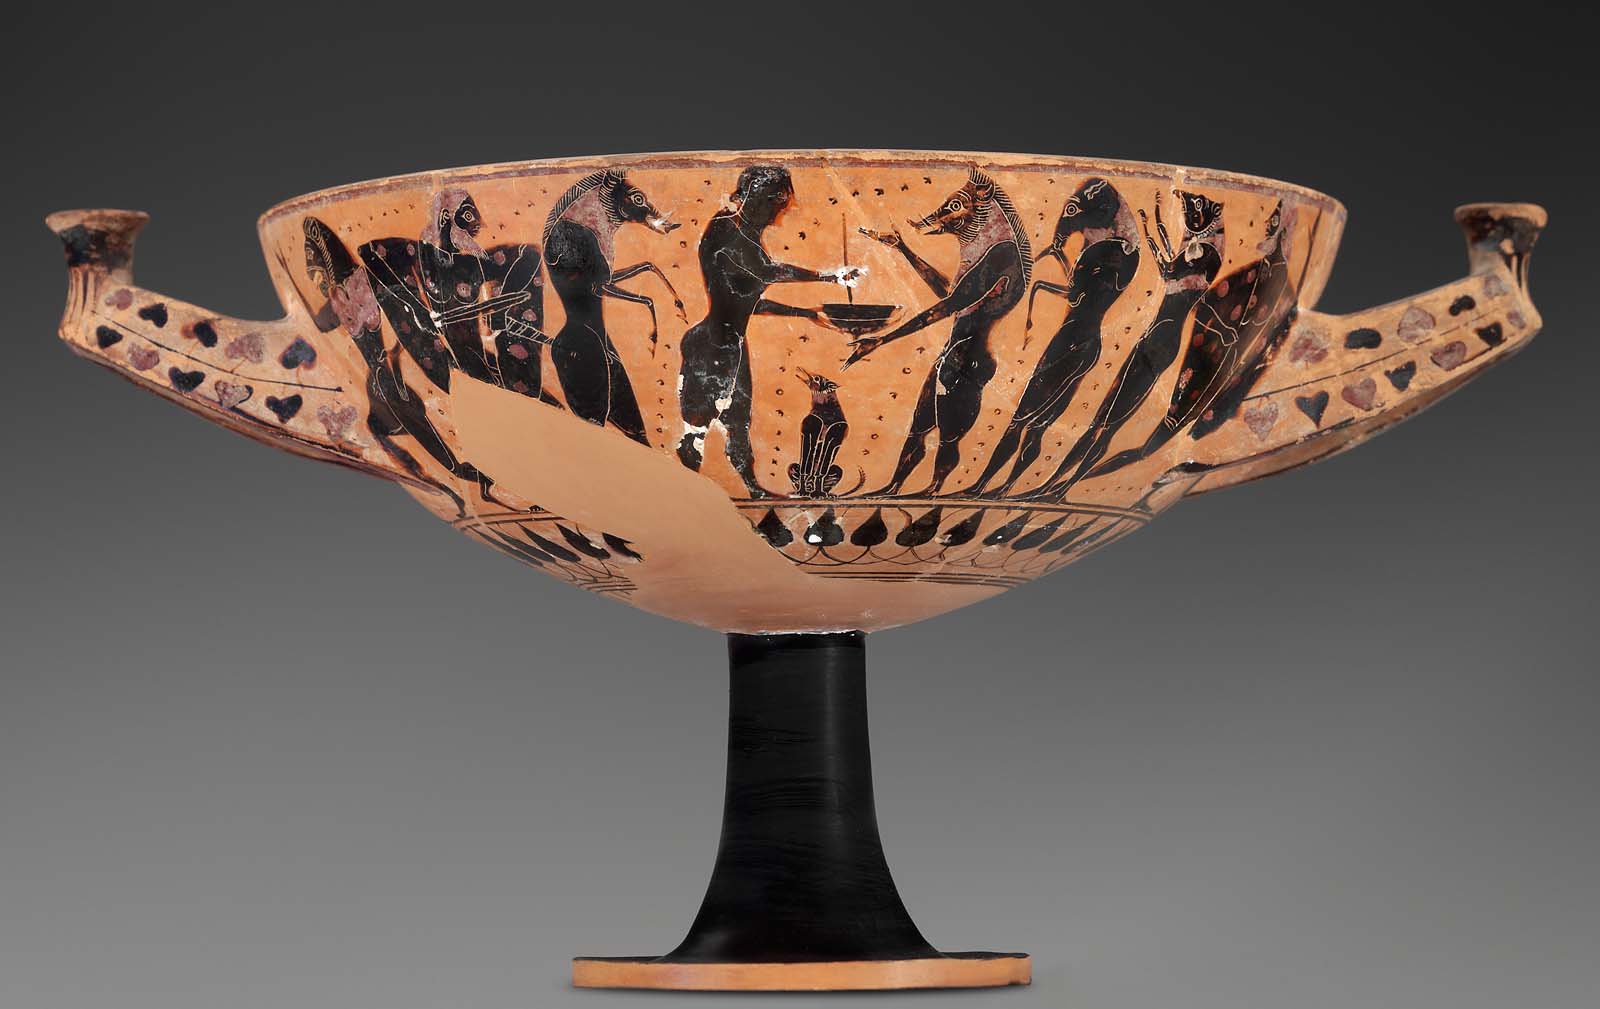 Drinking cup depicting scenes from the Odyssey